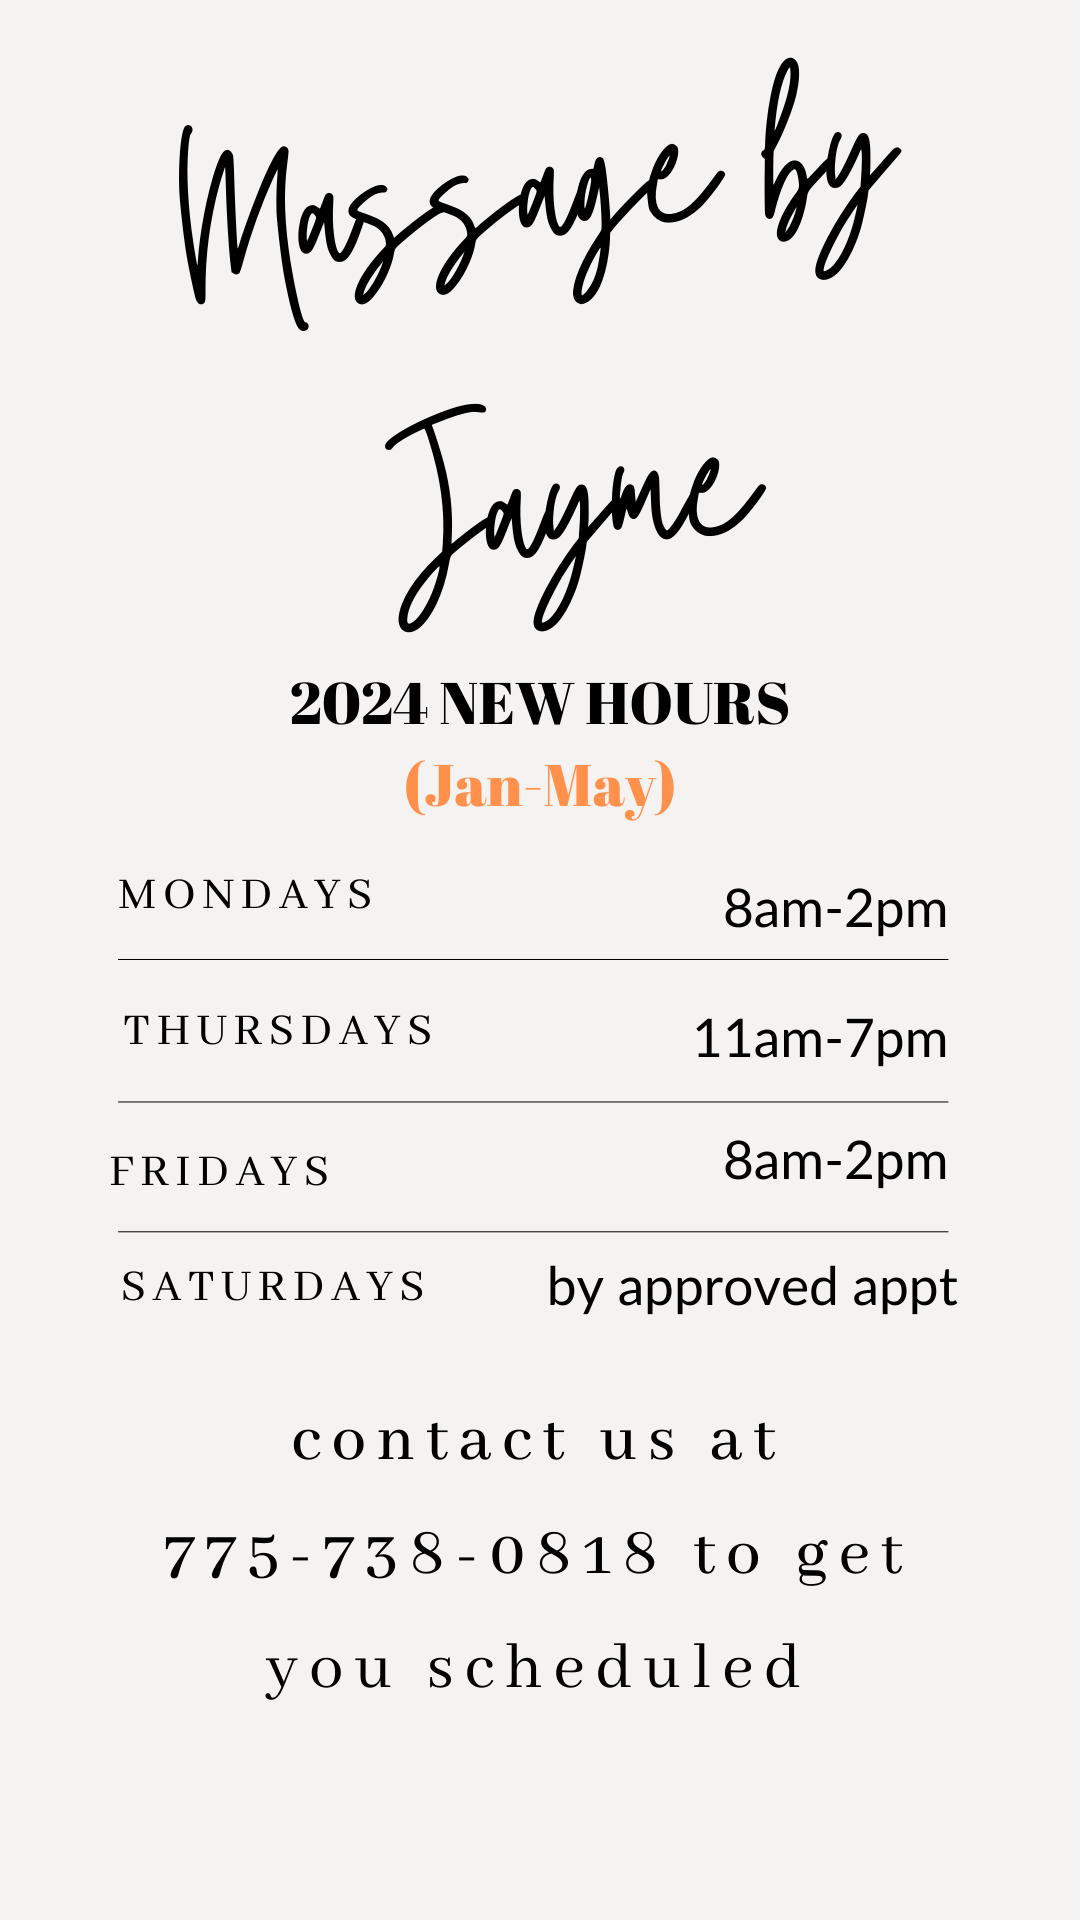 Massage by Jayme 2024 hours.png